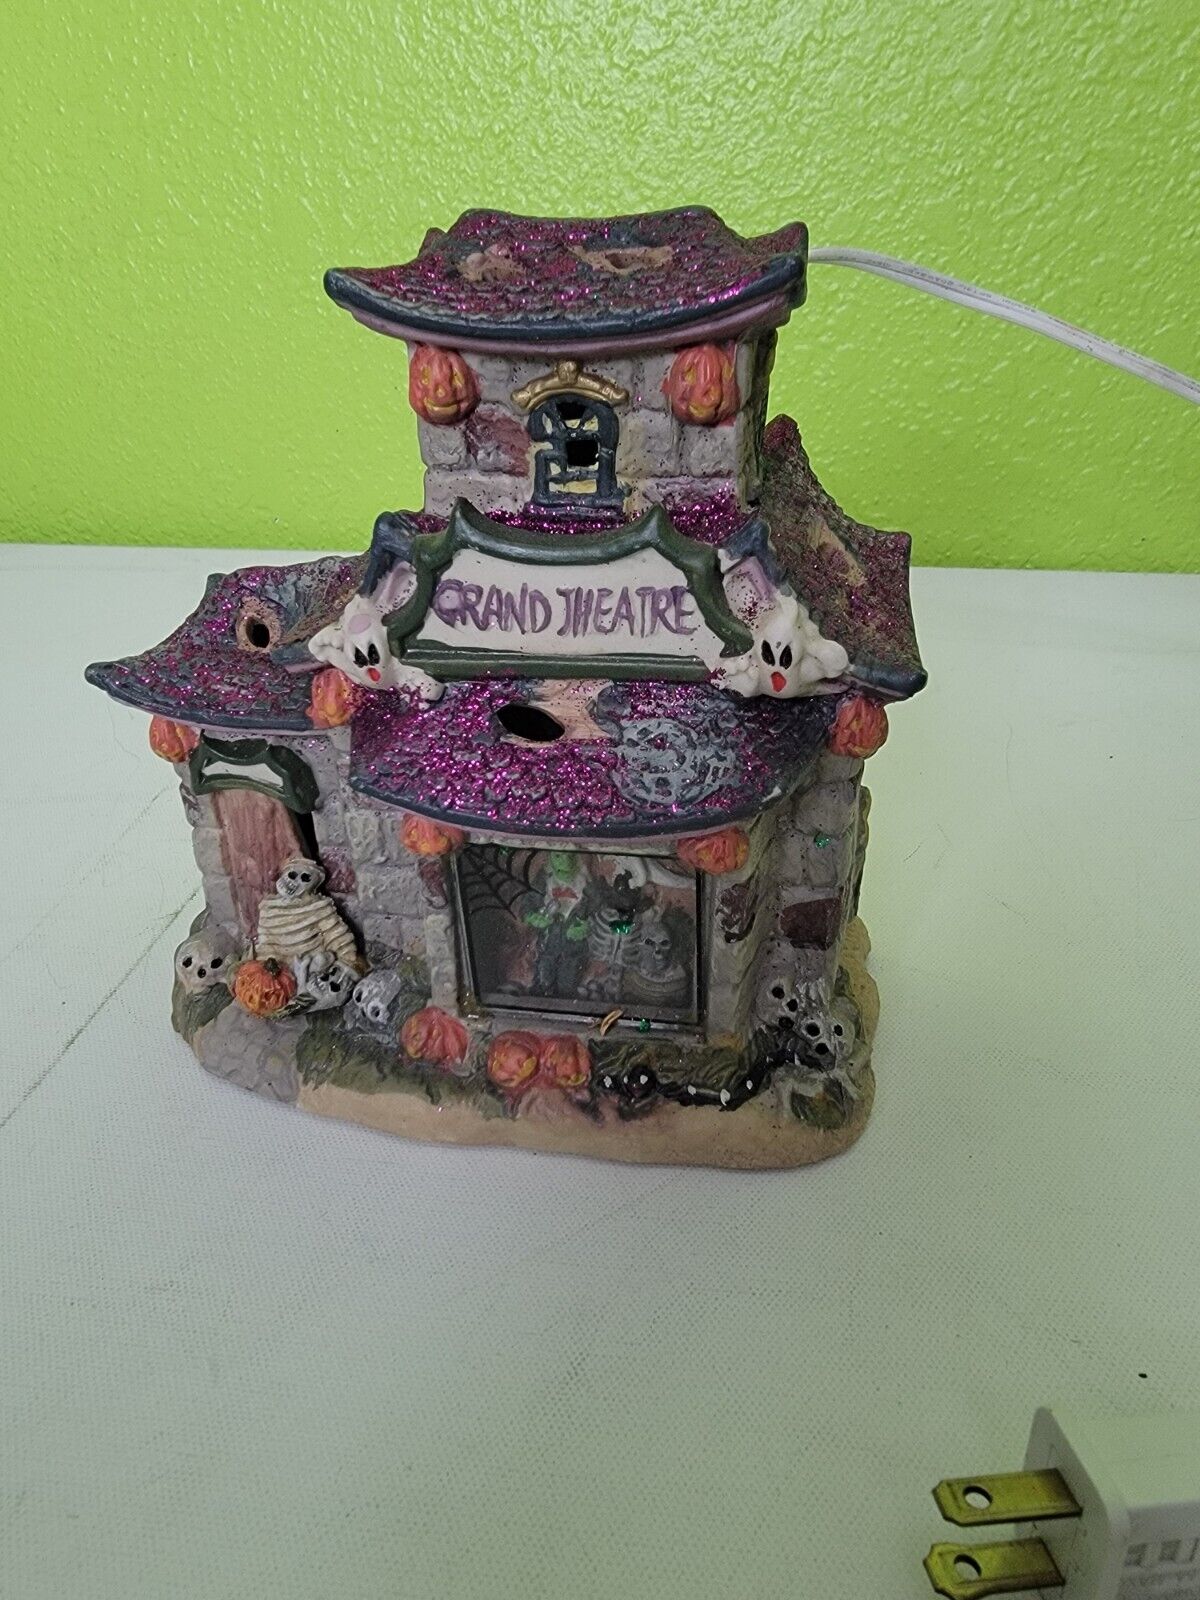 Spookyside Estates by Lemax Spooky Town Lighted Building Grand Theater Vtg Decor